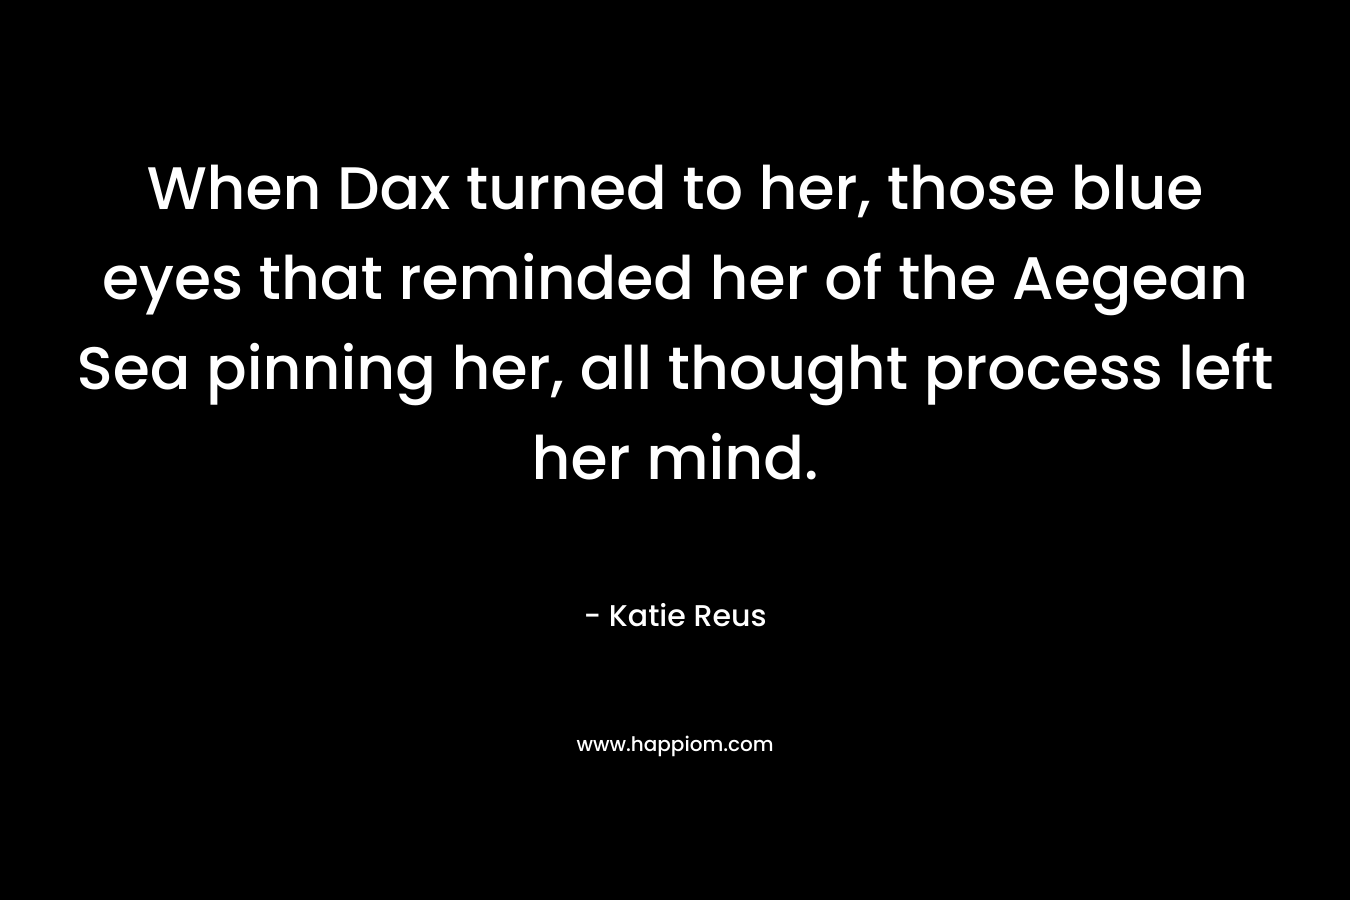 When Dax turned to her, those blue eyes that reminded her of the Aegean Sea pinning her, all thought process left her mind. – Katie Reus